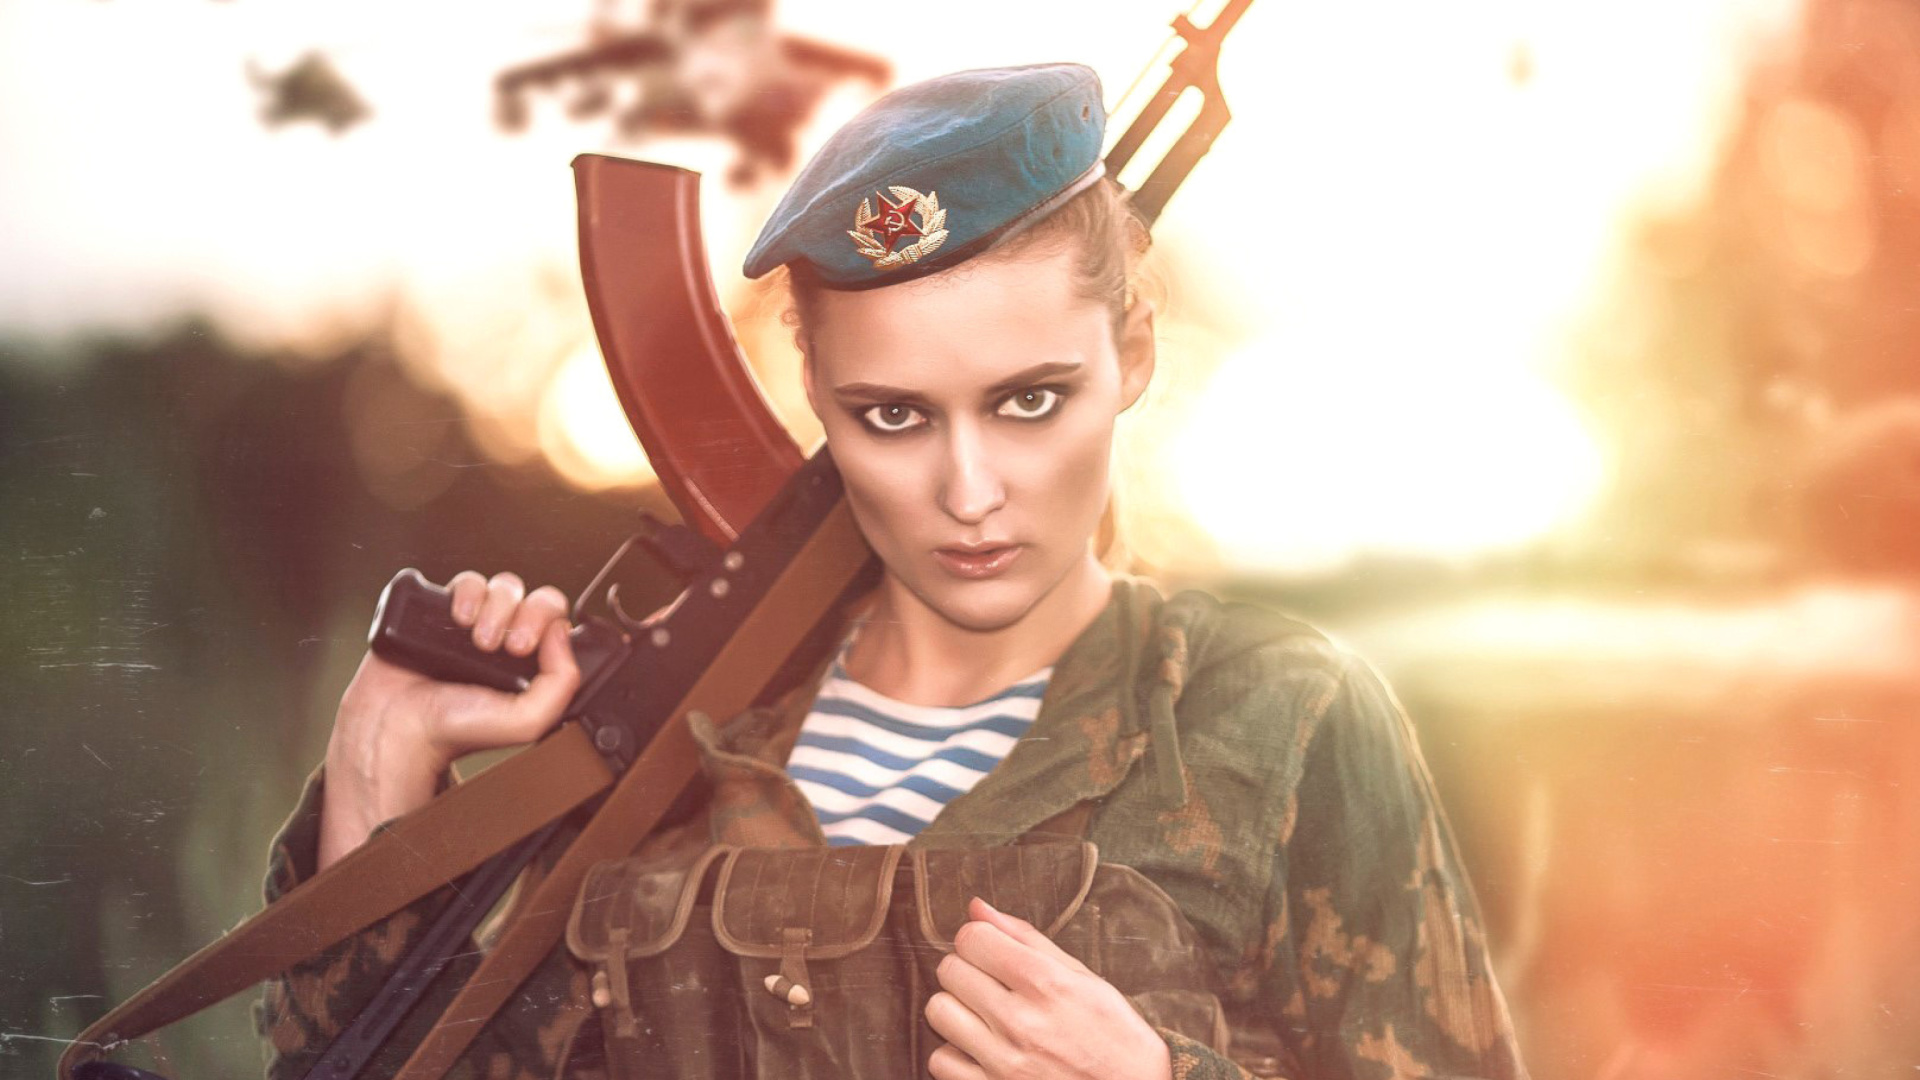 Russian Girl and Weapon HD wallpaper 1920x1080